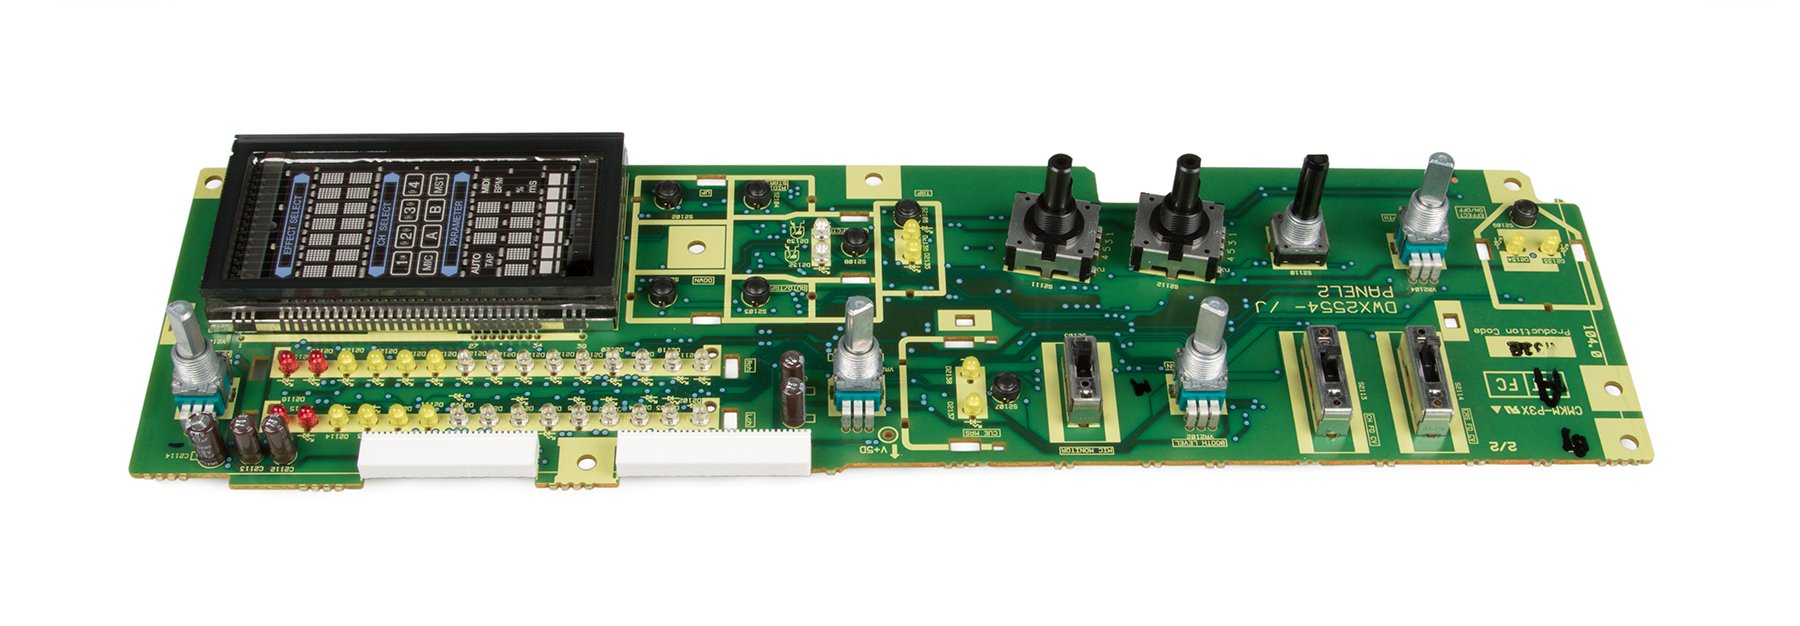 Pioneer Dwx2554 Panel 2 Pcb Assembly For Djm 800 Full Compass Systems